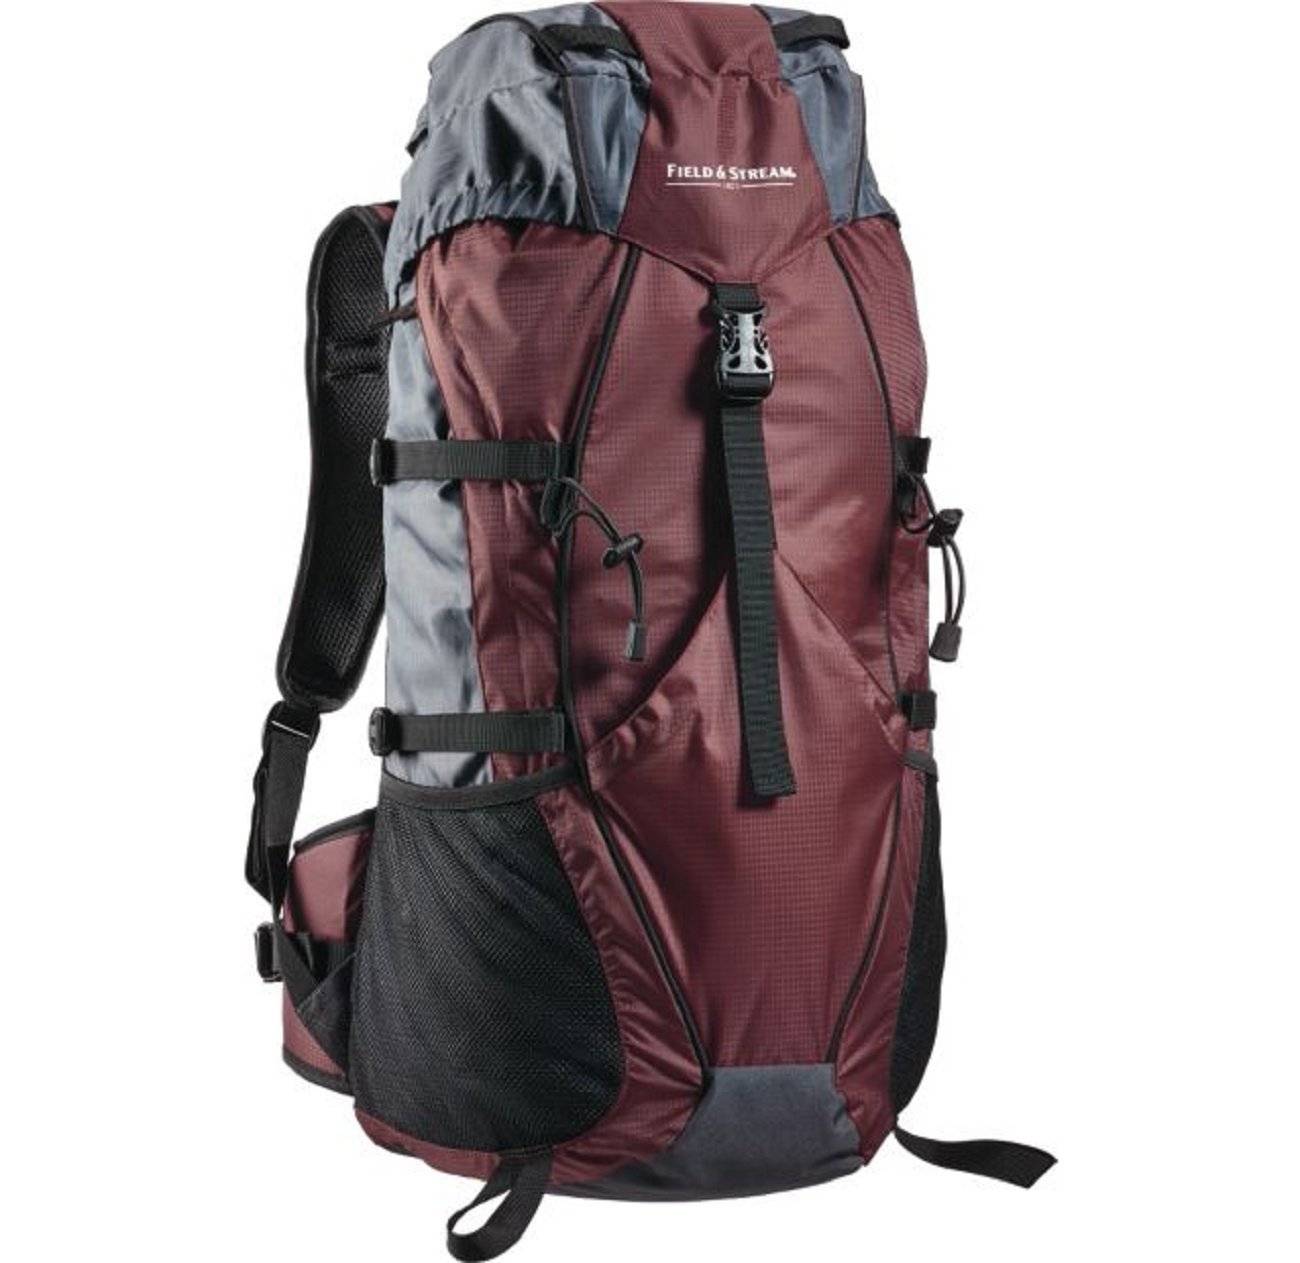 Field & Stream Mountain Scout 45L Internal Frame Hiking Pack